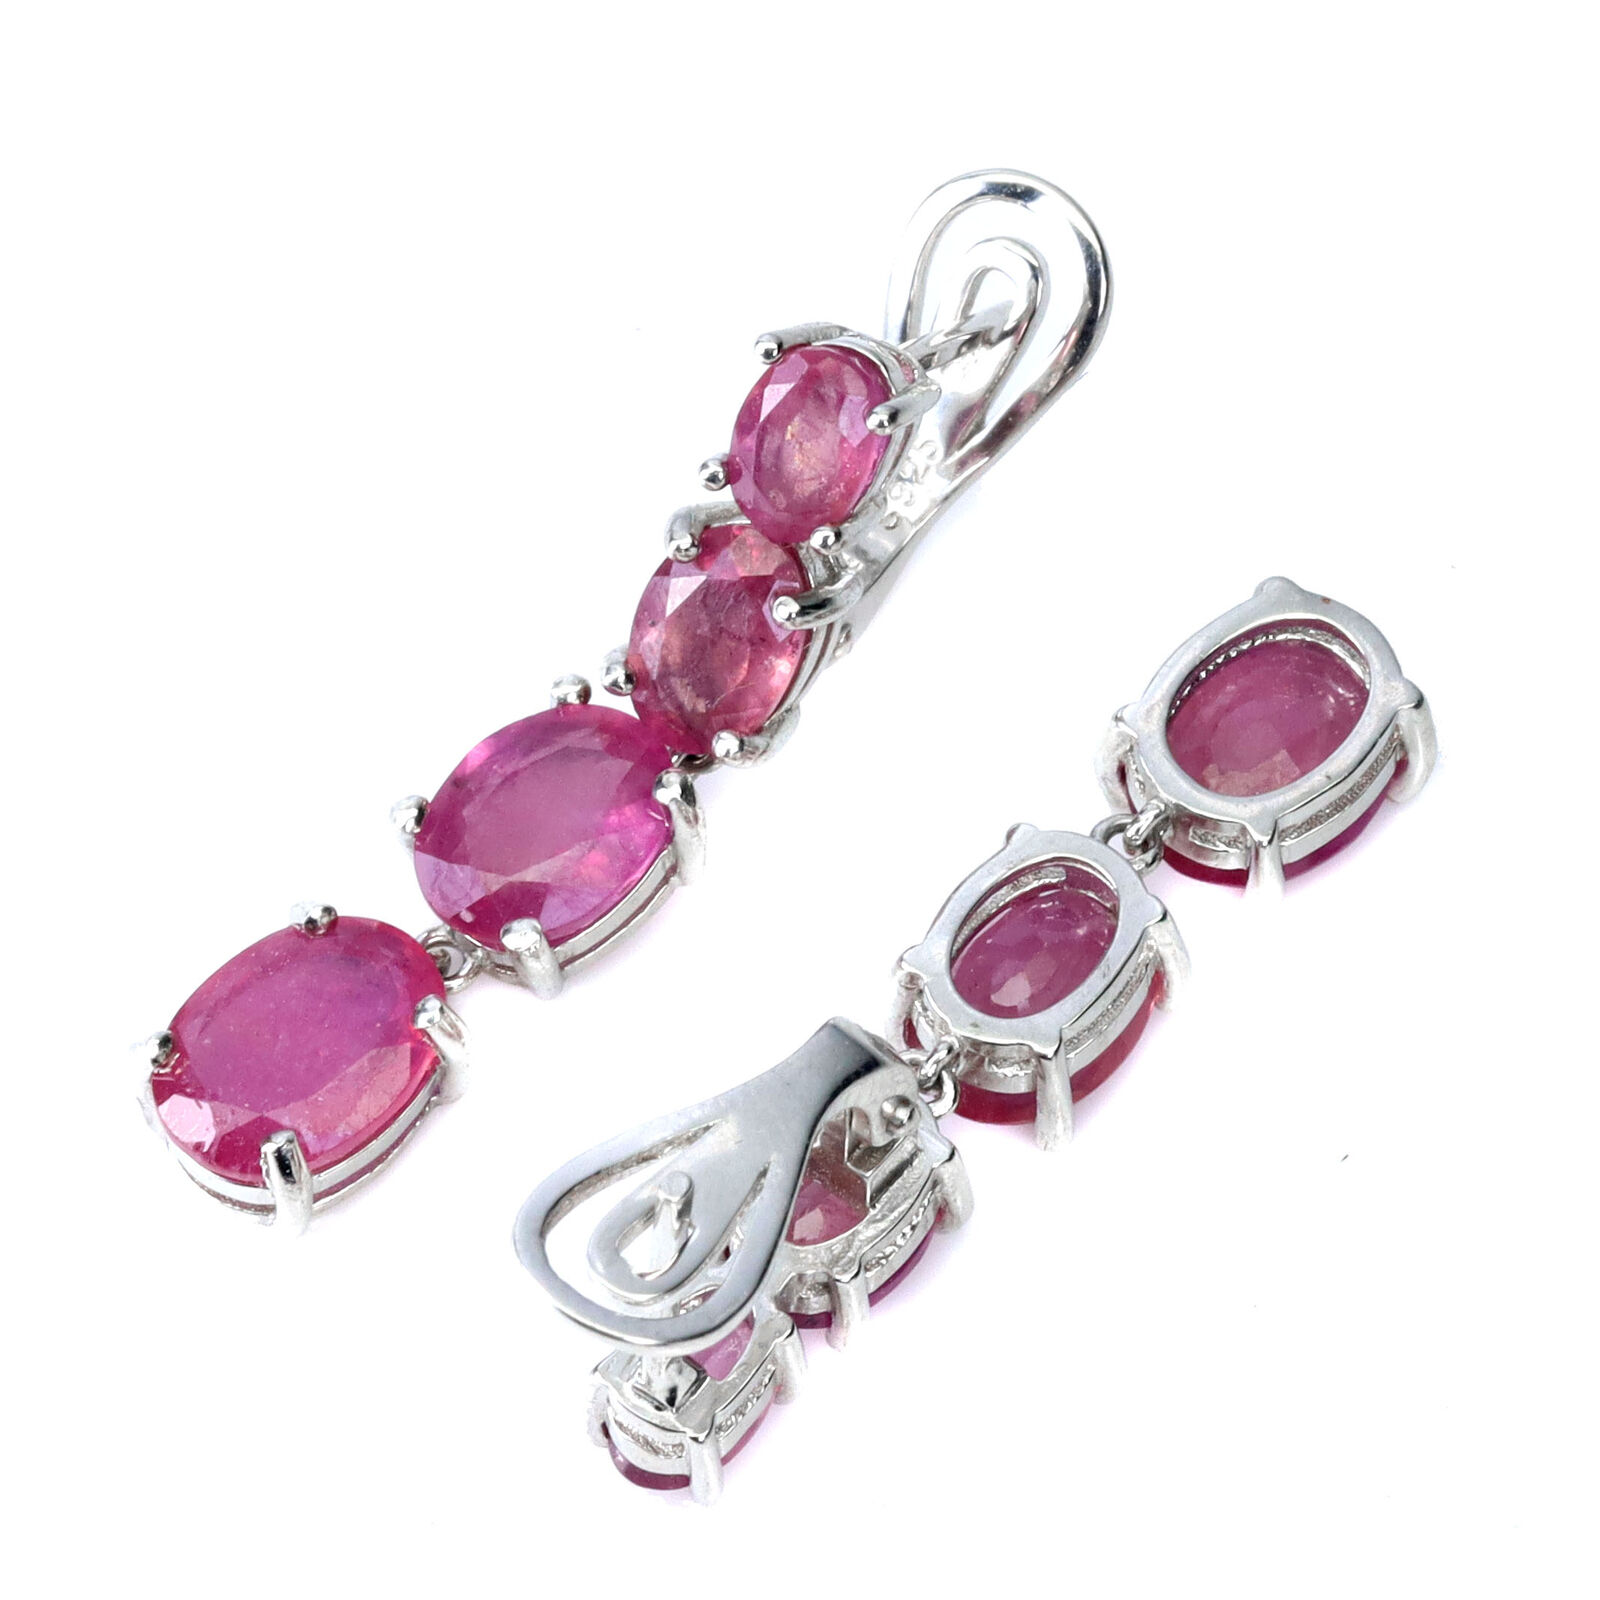 A pair of 925 silver drop earrings set with oval cut rubies, L. 3.3cm. - Image 2 of 2